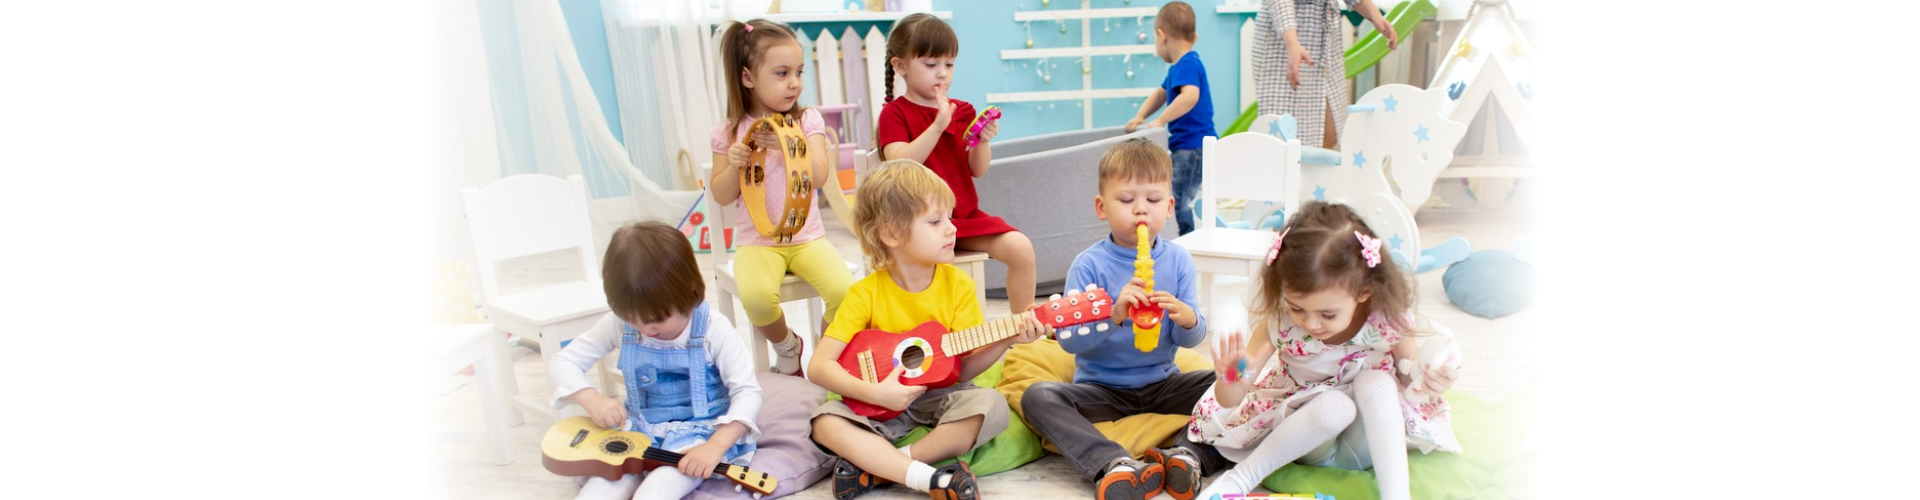 Kids learning musical instruments on lesson